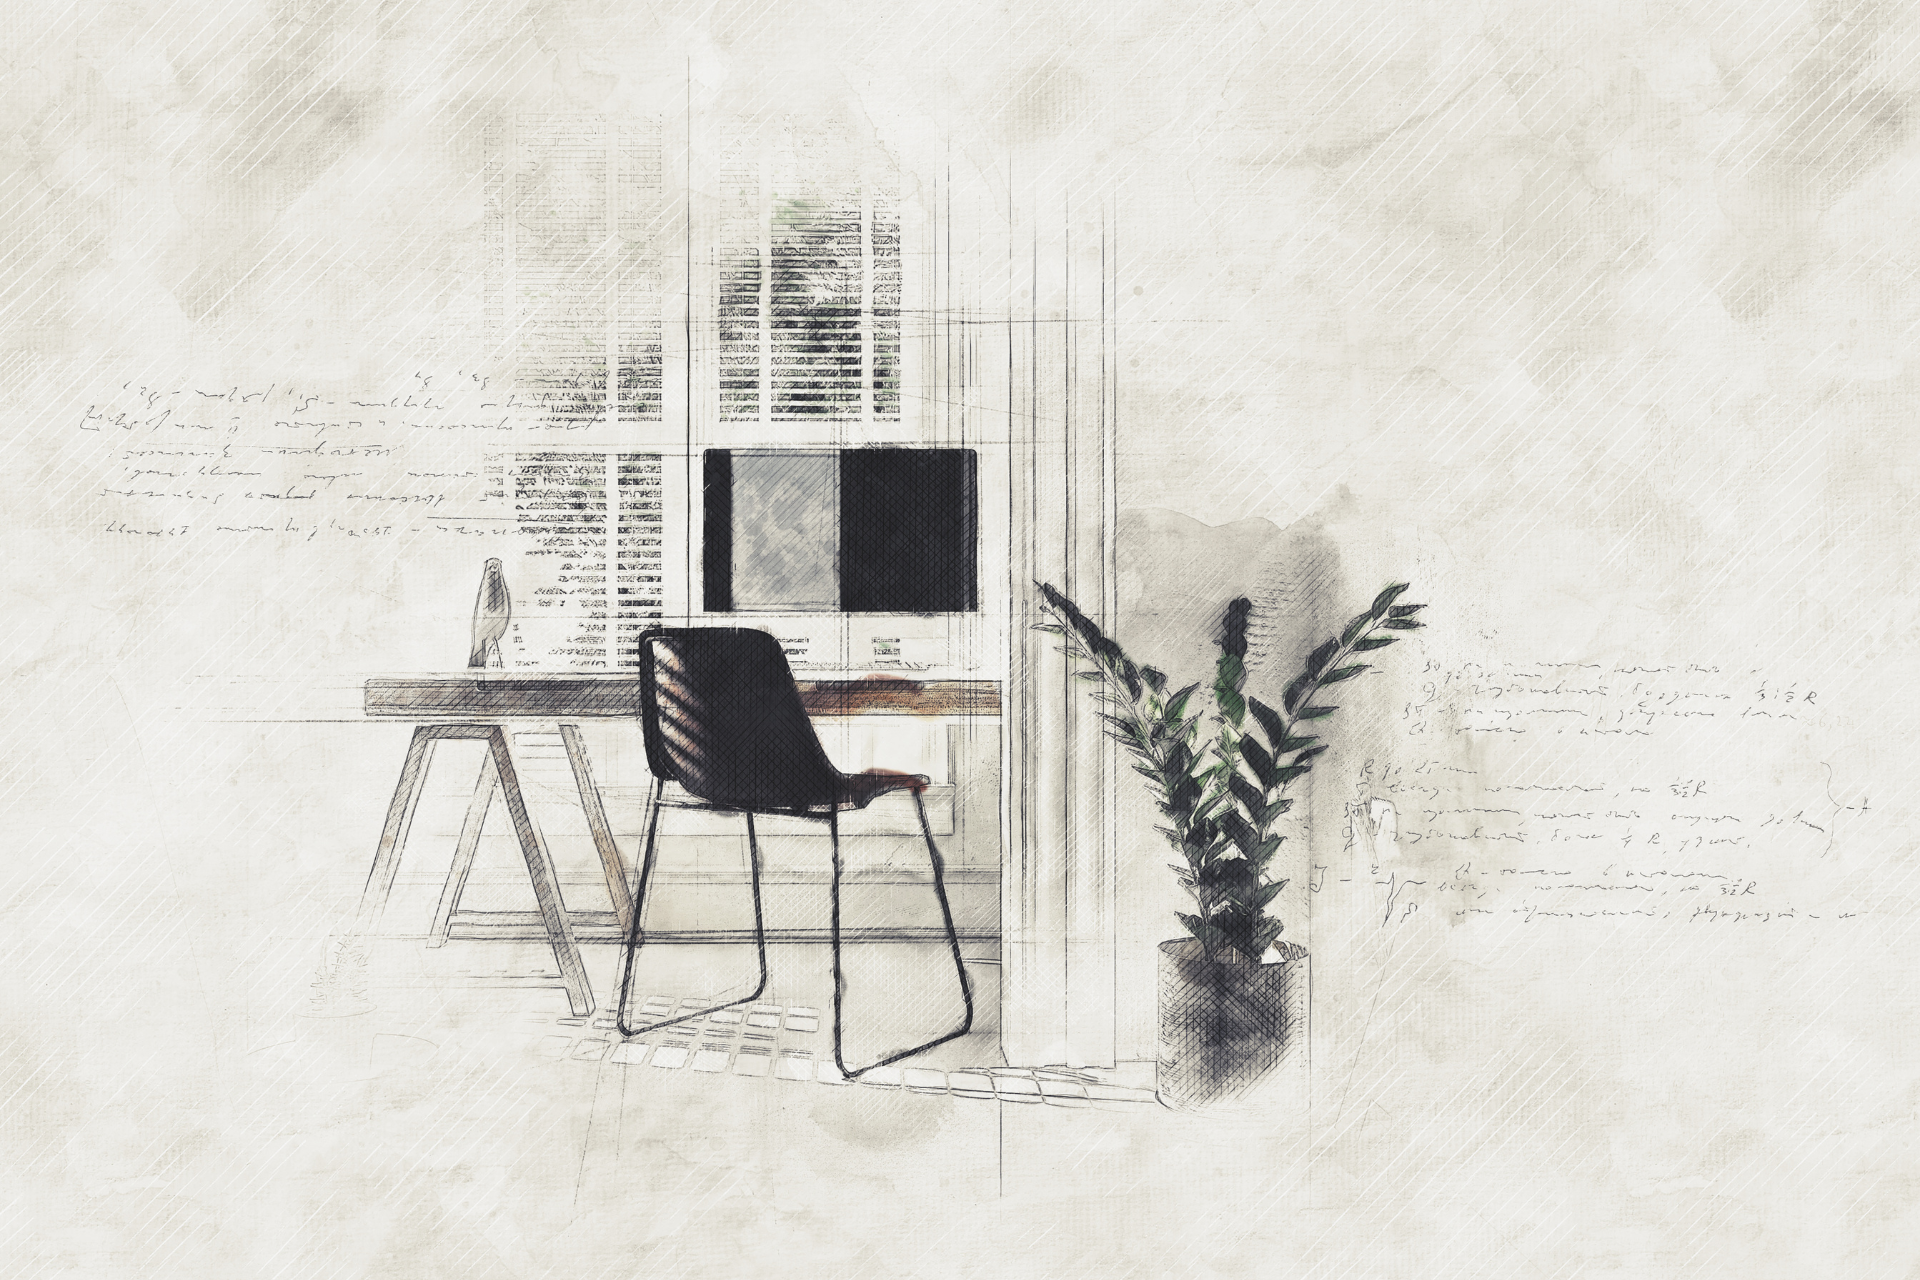 A mock-up drawing of a desk with a chair and a computer on it.